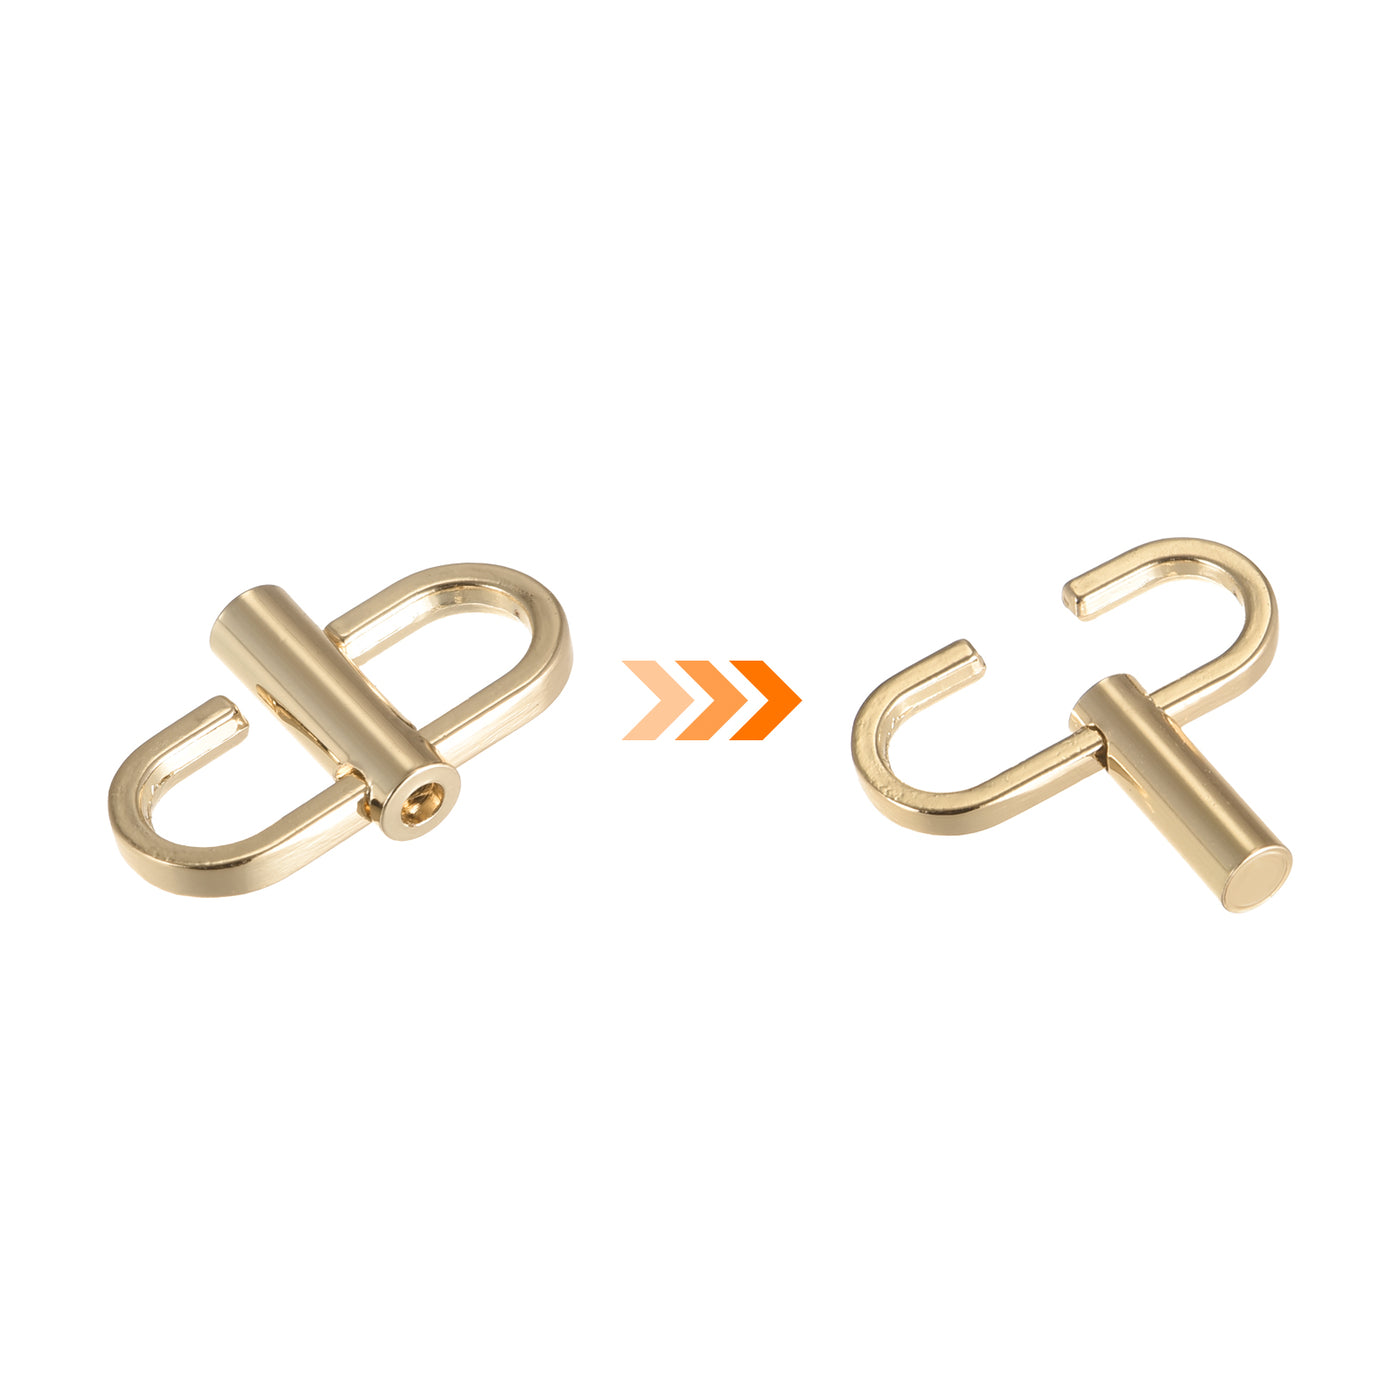 uxcell Uxcell Adjustable Metal Buckles for Chain Strap, 5Pcs 22x10mm Chain Shortener, Gold